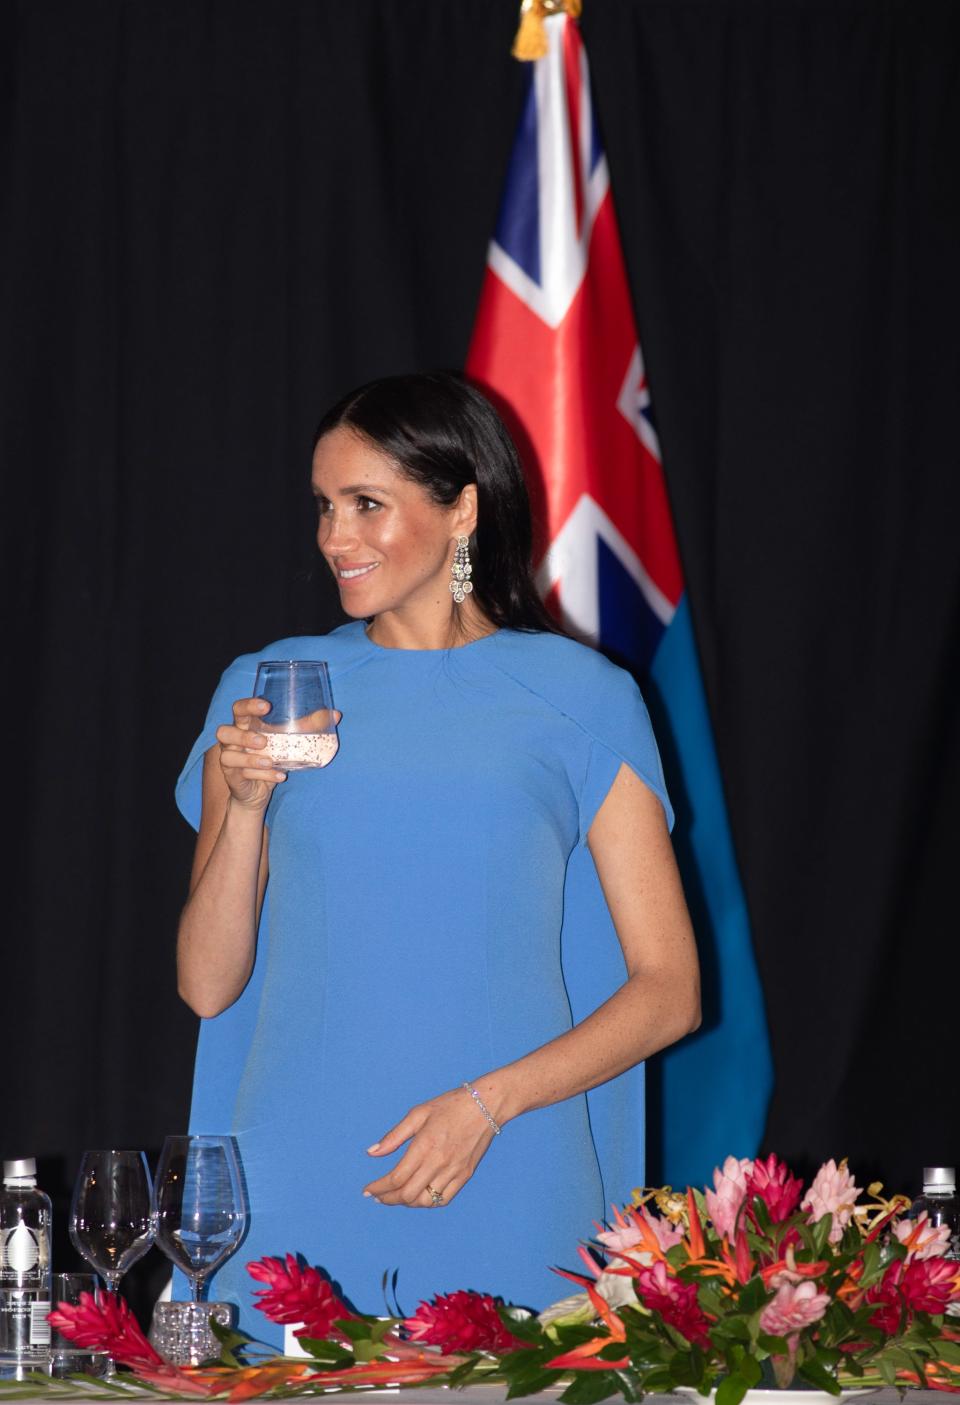 Meghan Markle has been wearing a diamond tennis bracelet for months—turns out, it was a gift given to her by father-in-law Prince Charles.